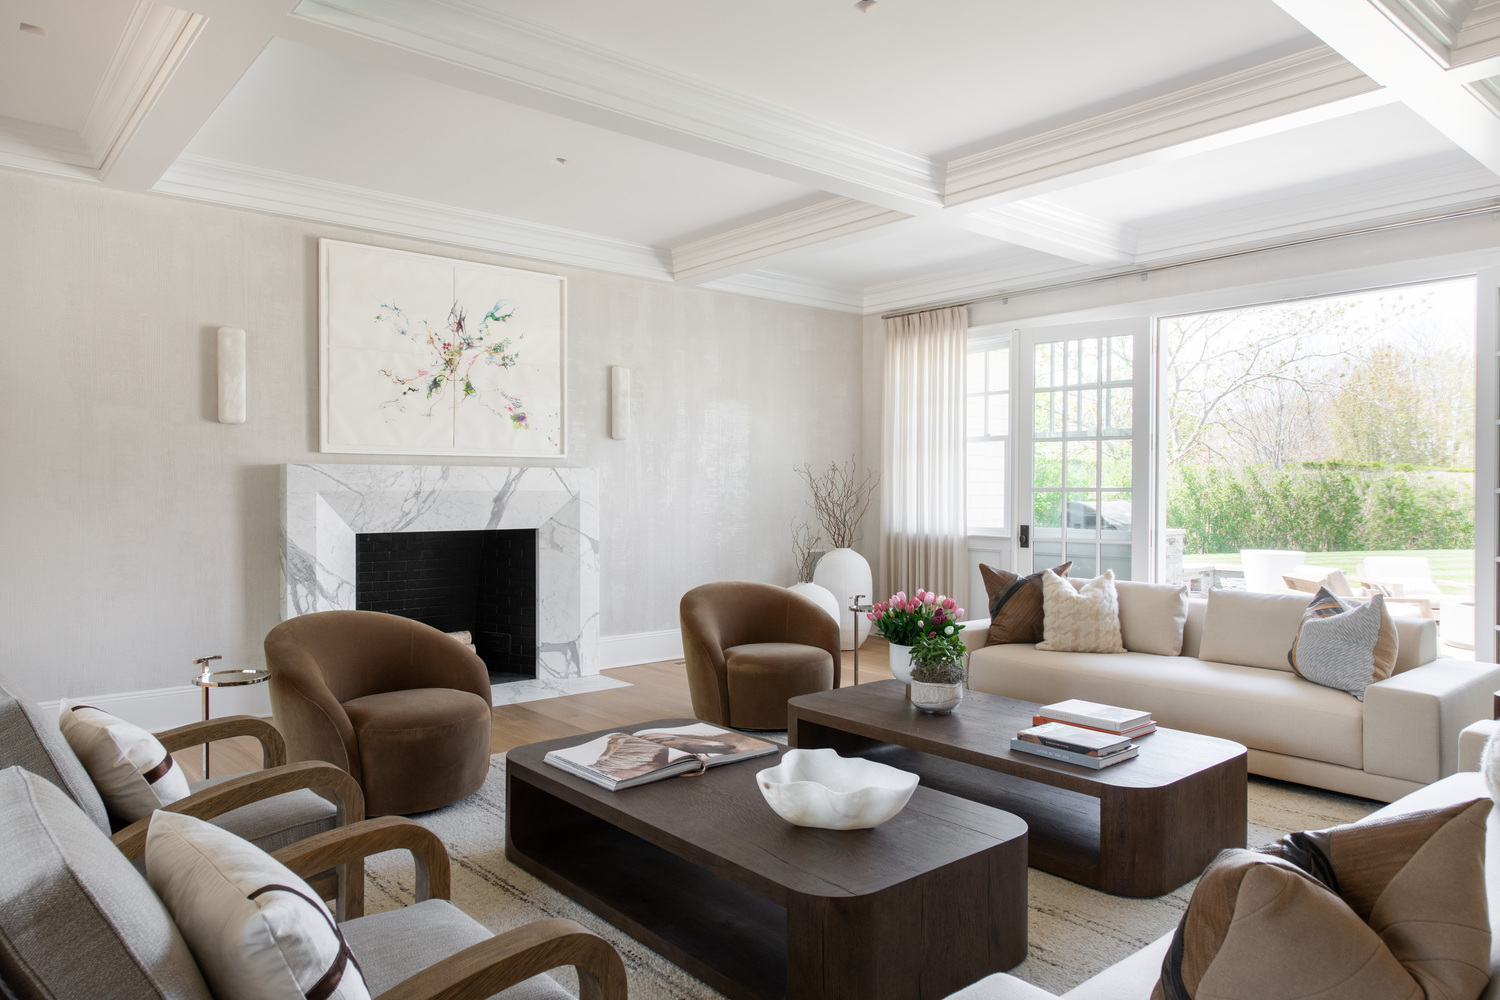 The living room features quiet neutrals, a theme used throughout the house. LENA YAREMENKO